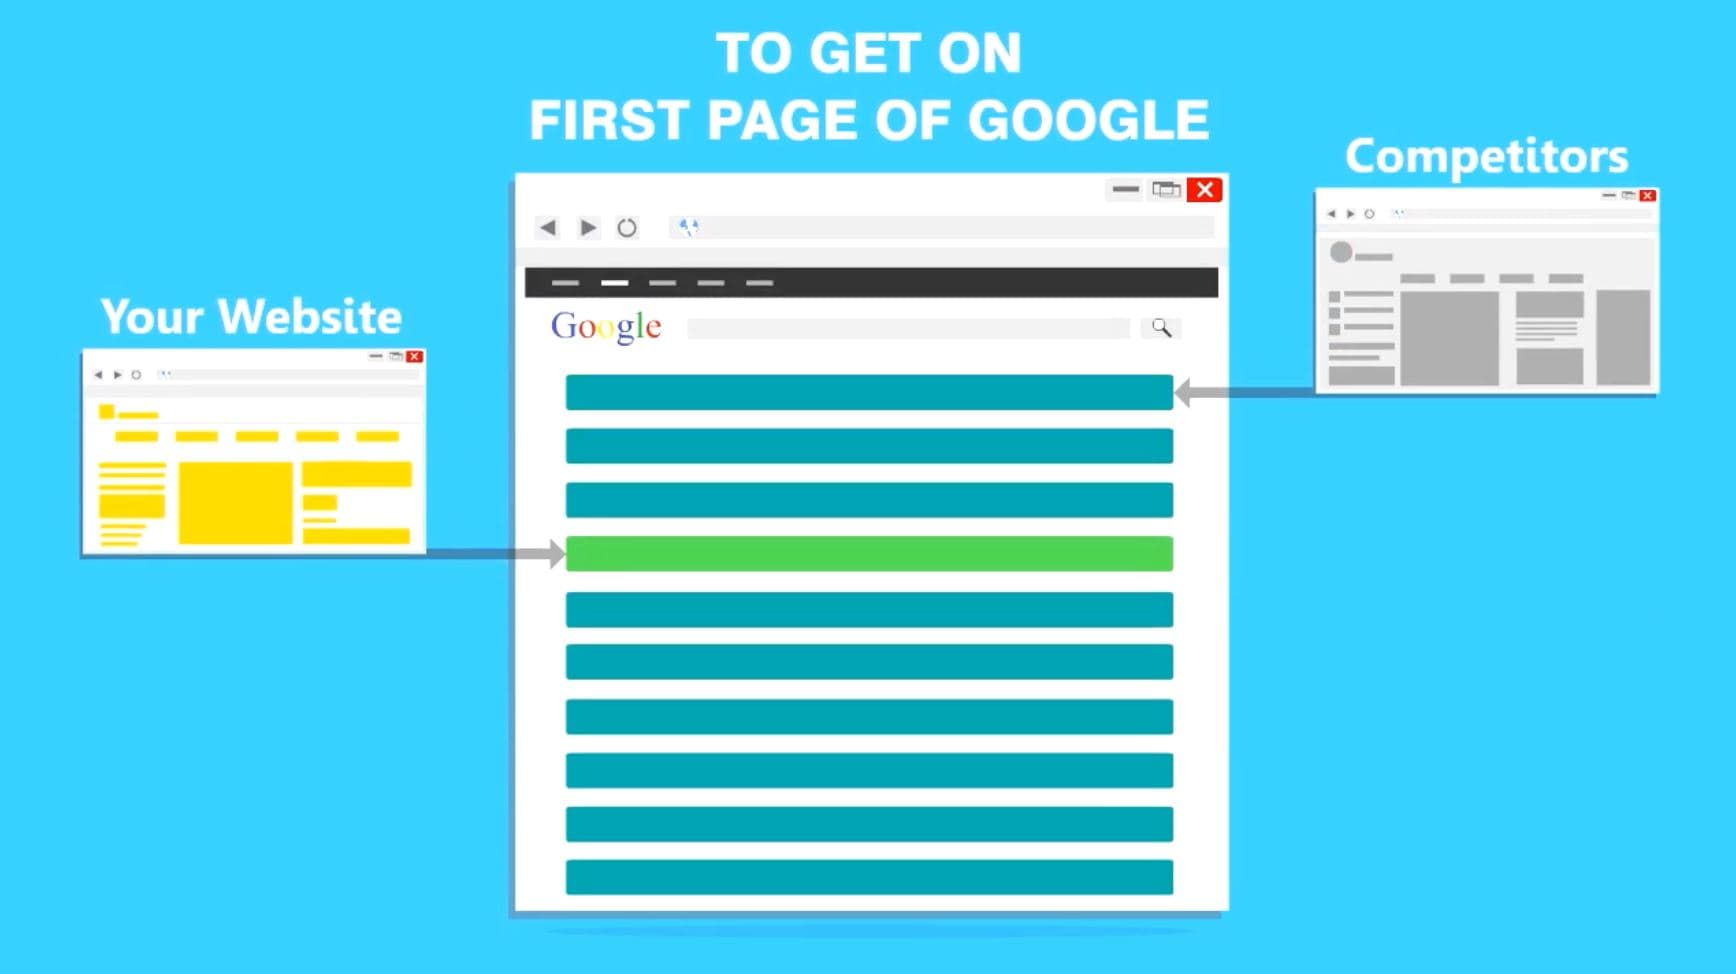 How to get on first page of google